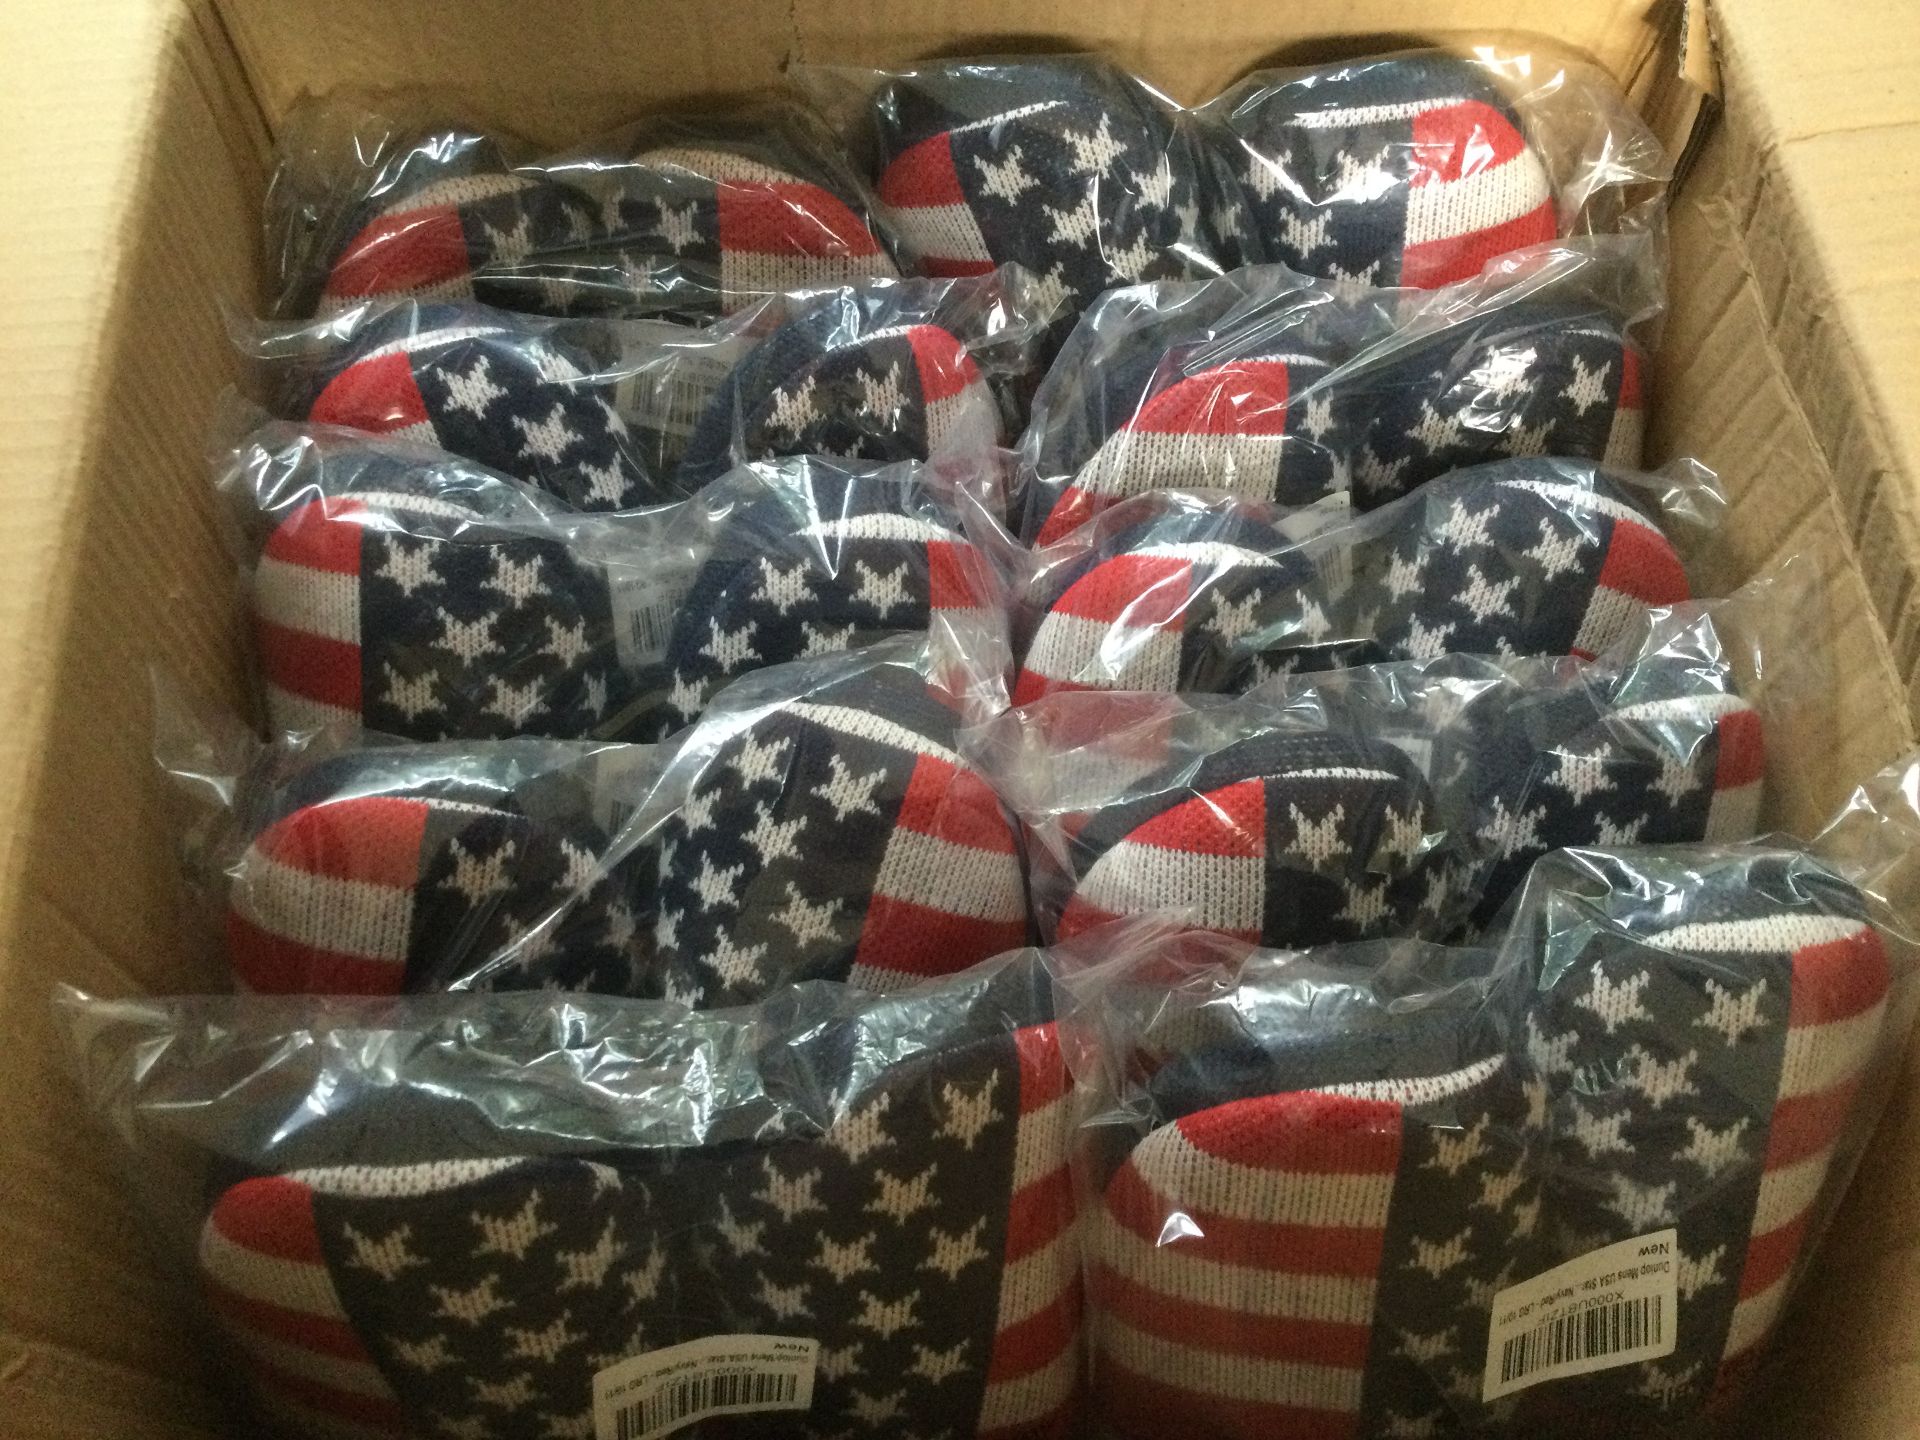 Job Lot 10 x Pairs Men's Dunlop, “USA Stars and Stripes” Memory Foam, Mule Slippers, Size L (10/1... - Image 4 of 7